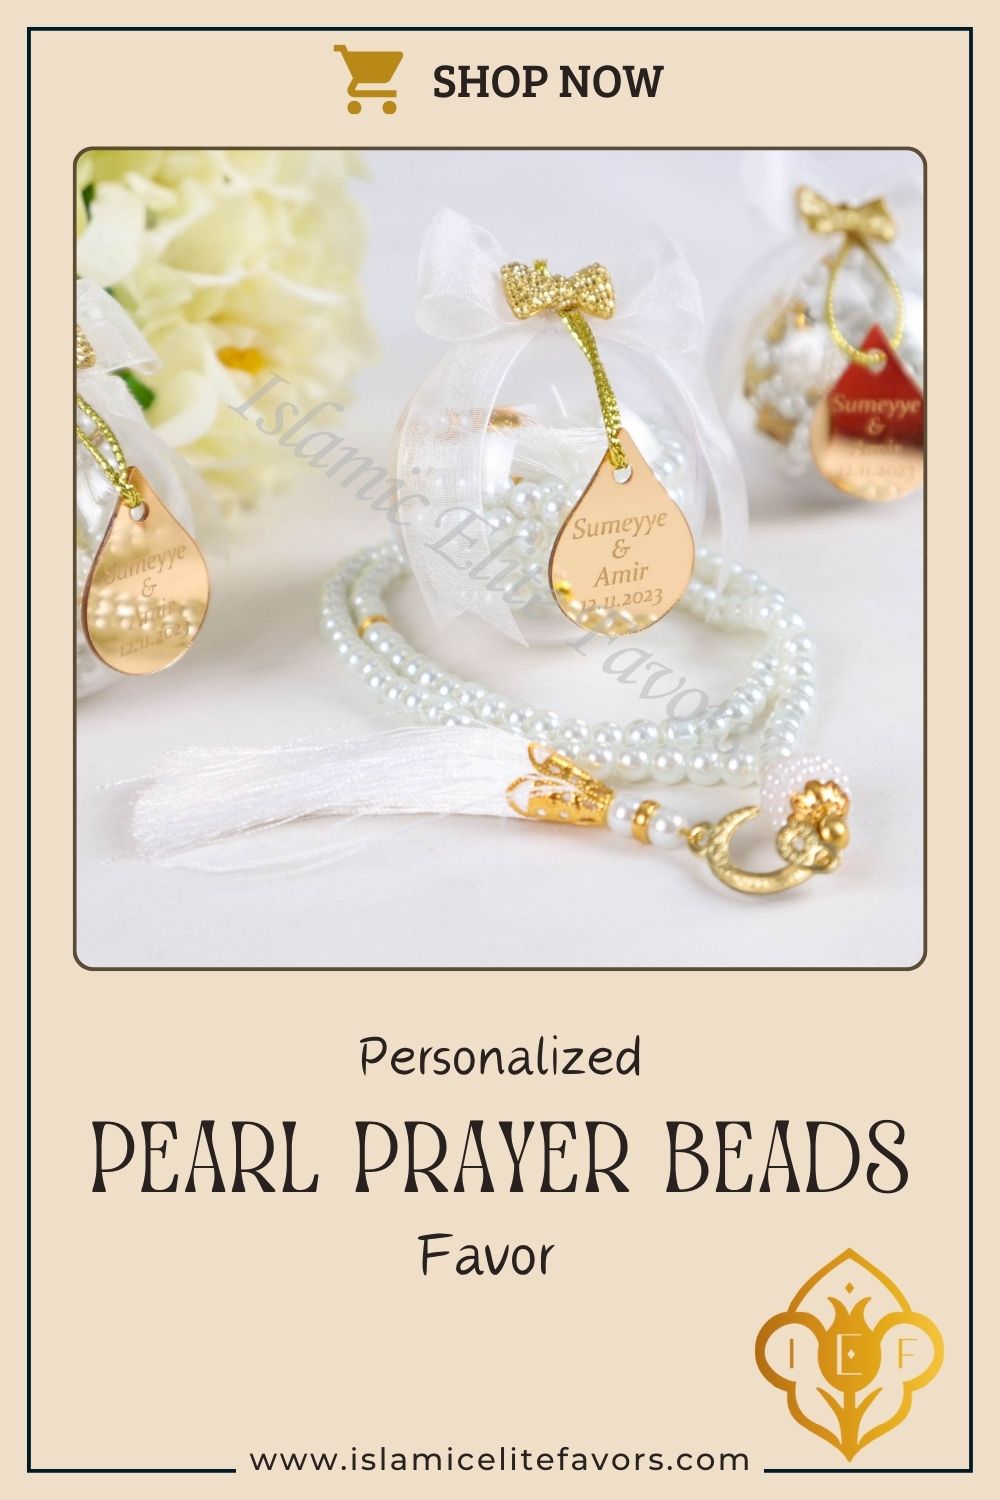 Personalized Pearl Prayer Beads Muslim Wedding Baby Shower Ramadan Gift - Islamic Elite Favors is a handmade gift shop offering a wide variety of unique and personalized gifts for all occasions. Whether you're looking for the perfect Ramadan, Eid, Hajj, wedding gift or something special for a birthday, baby shower or anniversary, we have something for everyone. High quality, made with love.